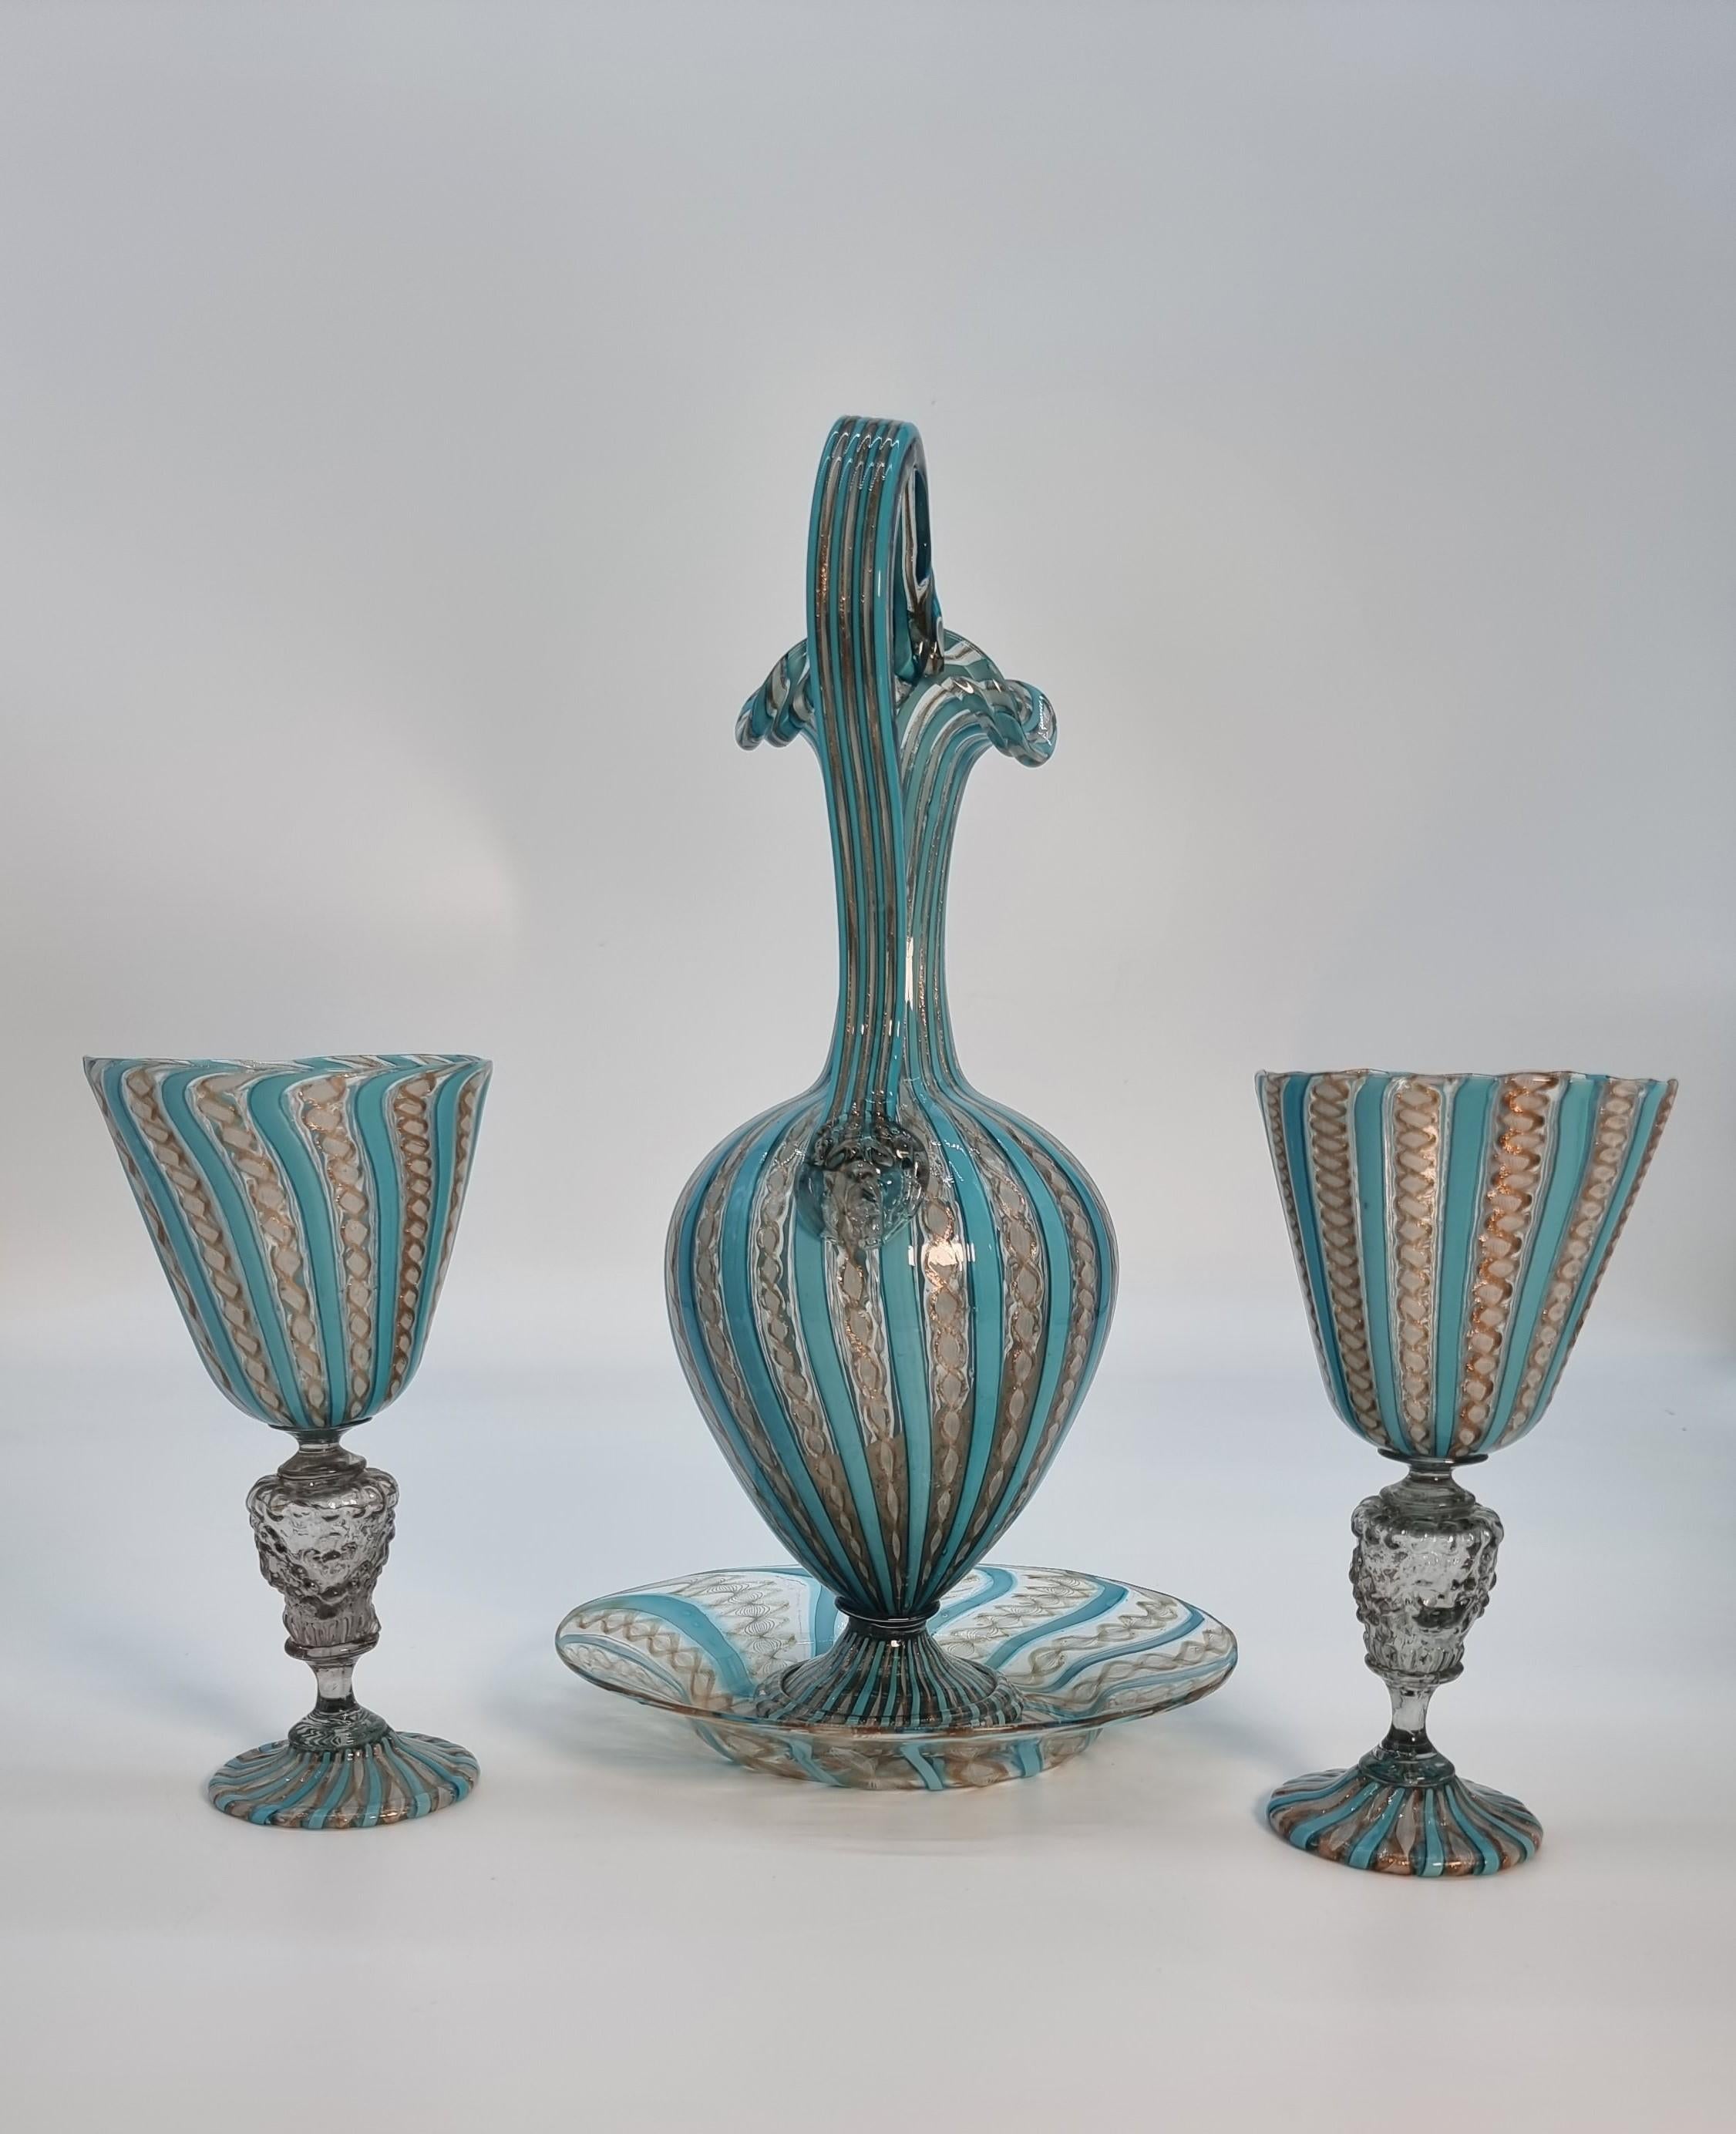 A superb Venetian lattico glass claret jug/ewer complete with matching stand and a pair of goblets

This beautiful set of Venetian lattice. glass is amazing. It has a jewel like quality which is very pleasing to the eye. It has an intricate and fine